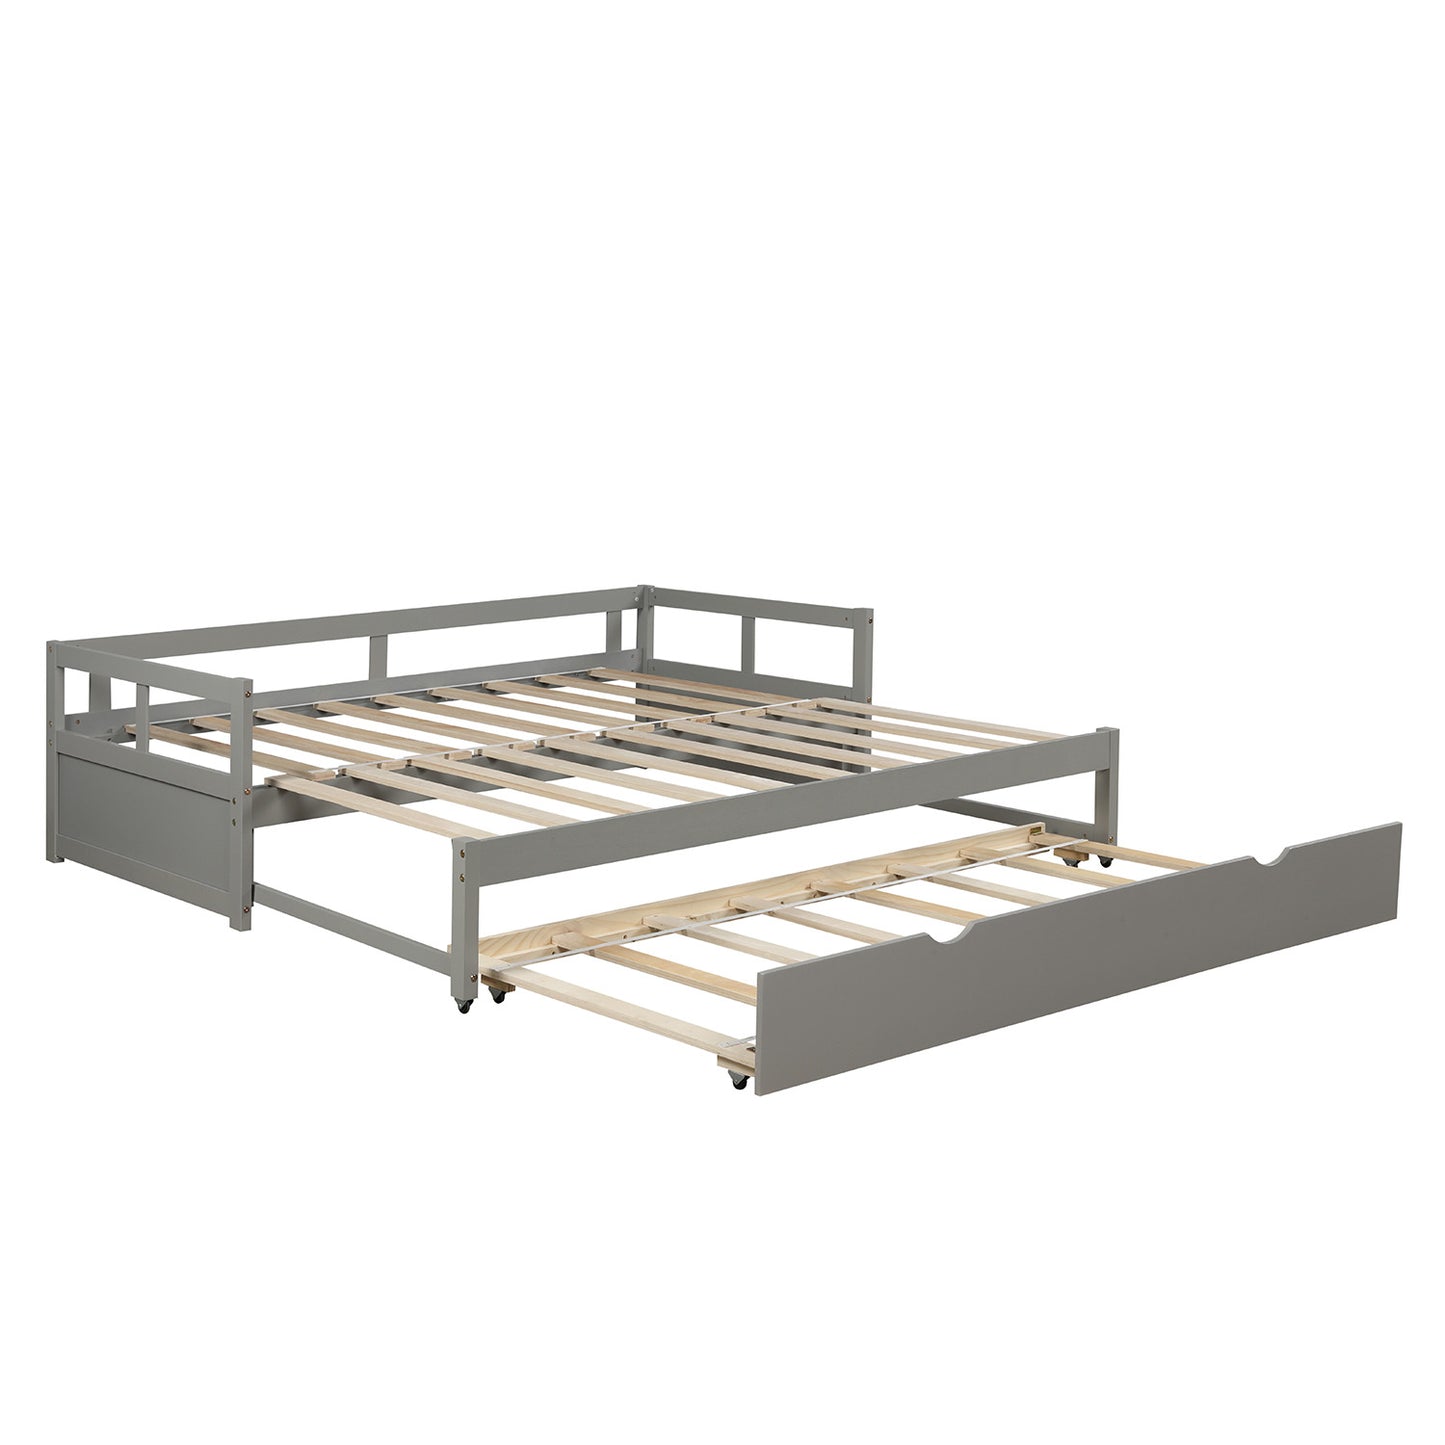 Extending Daybed with Trundle,Wooden Daybed with Trundle, Gray